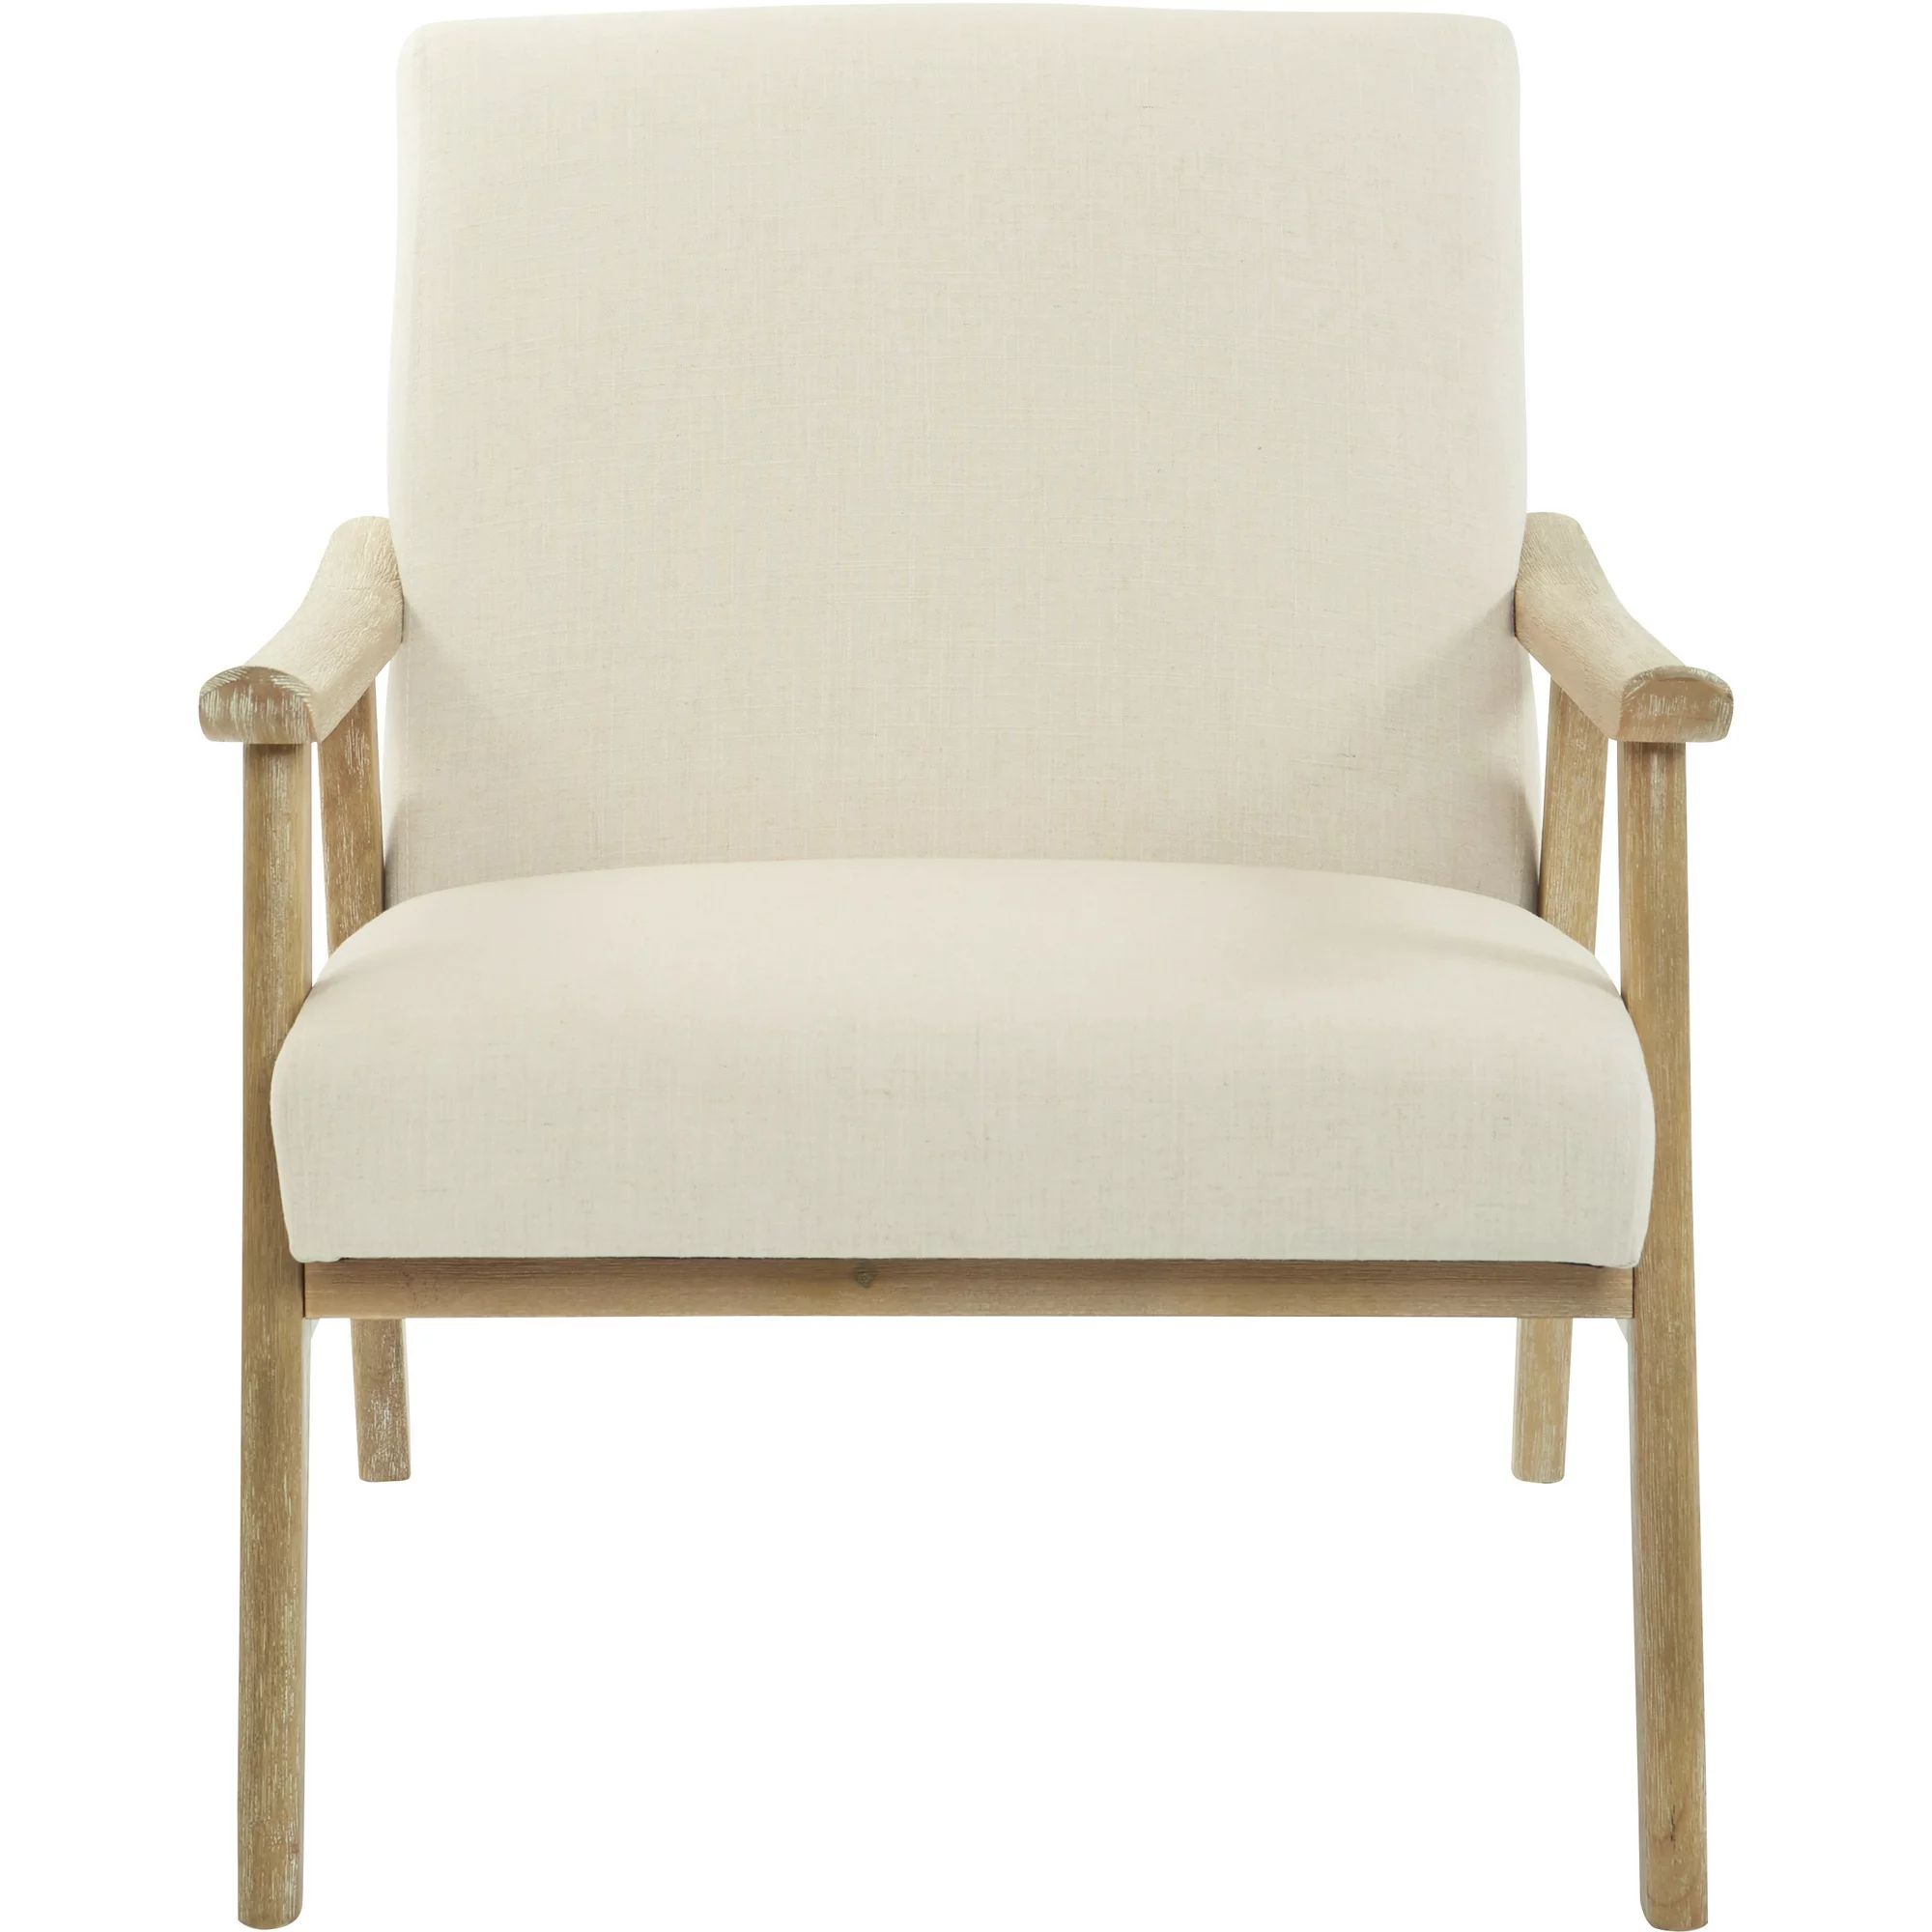 Weldon Chair in Linen fabric with Brushed Finished Frame | Walmart (US)